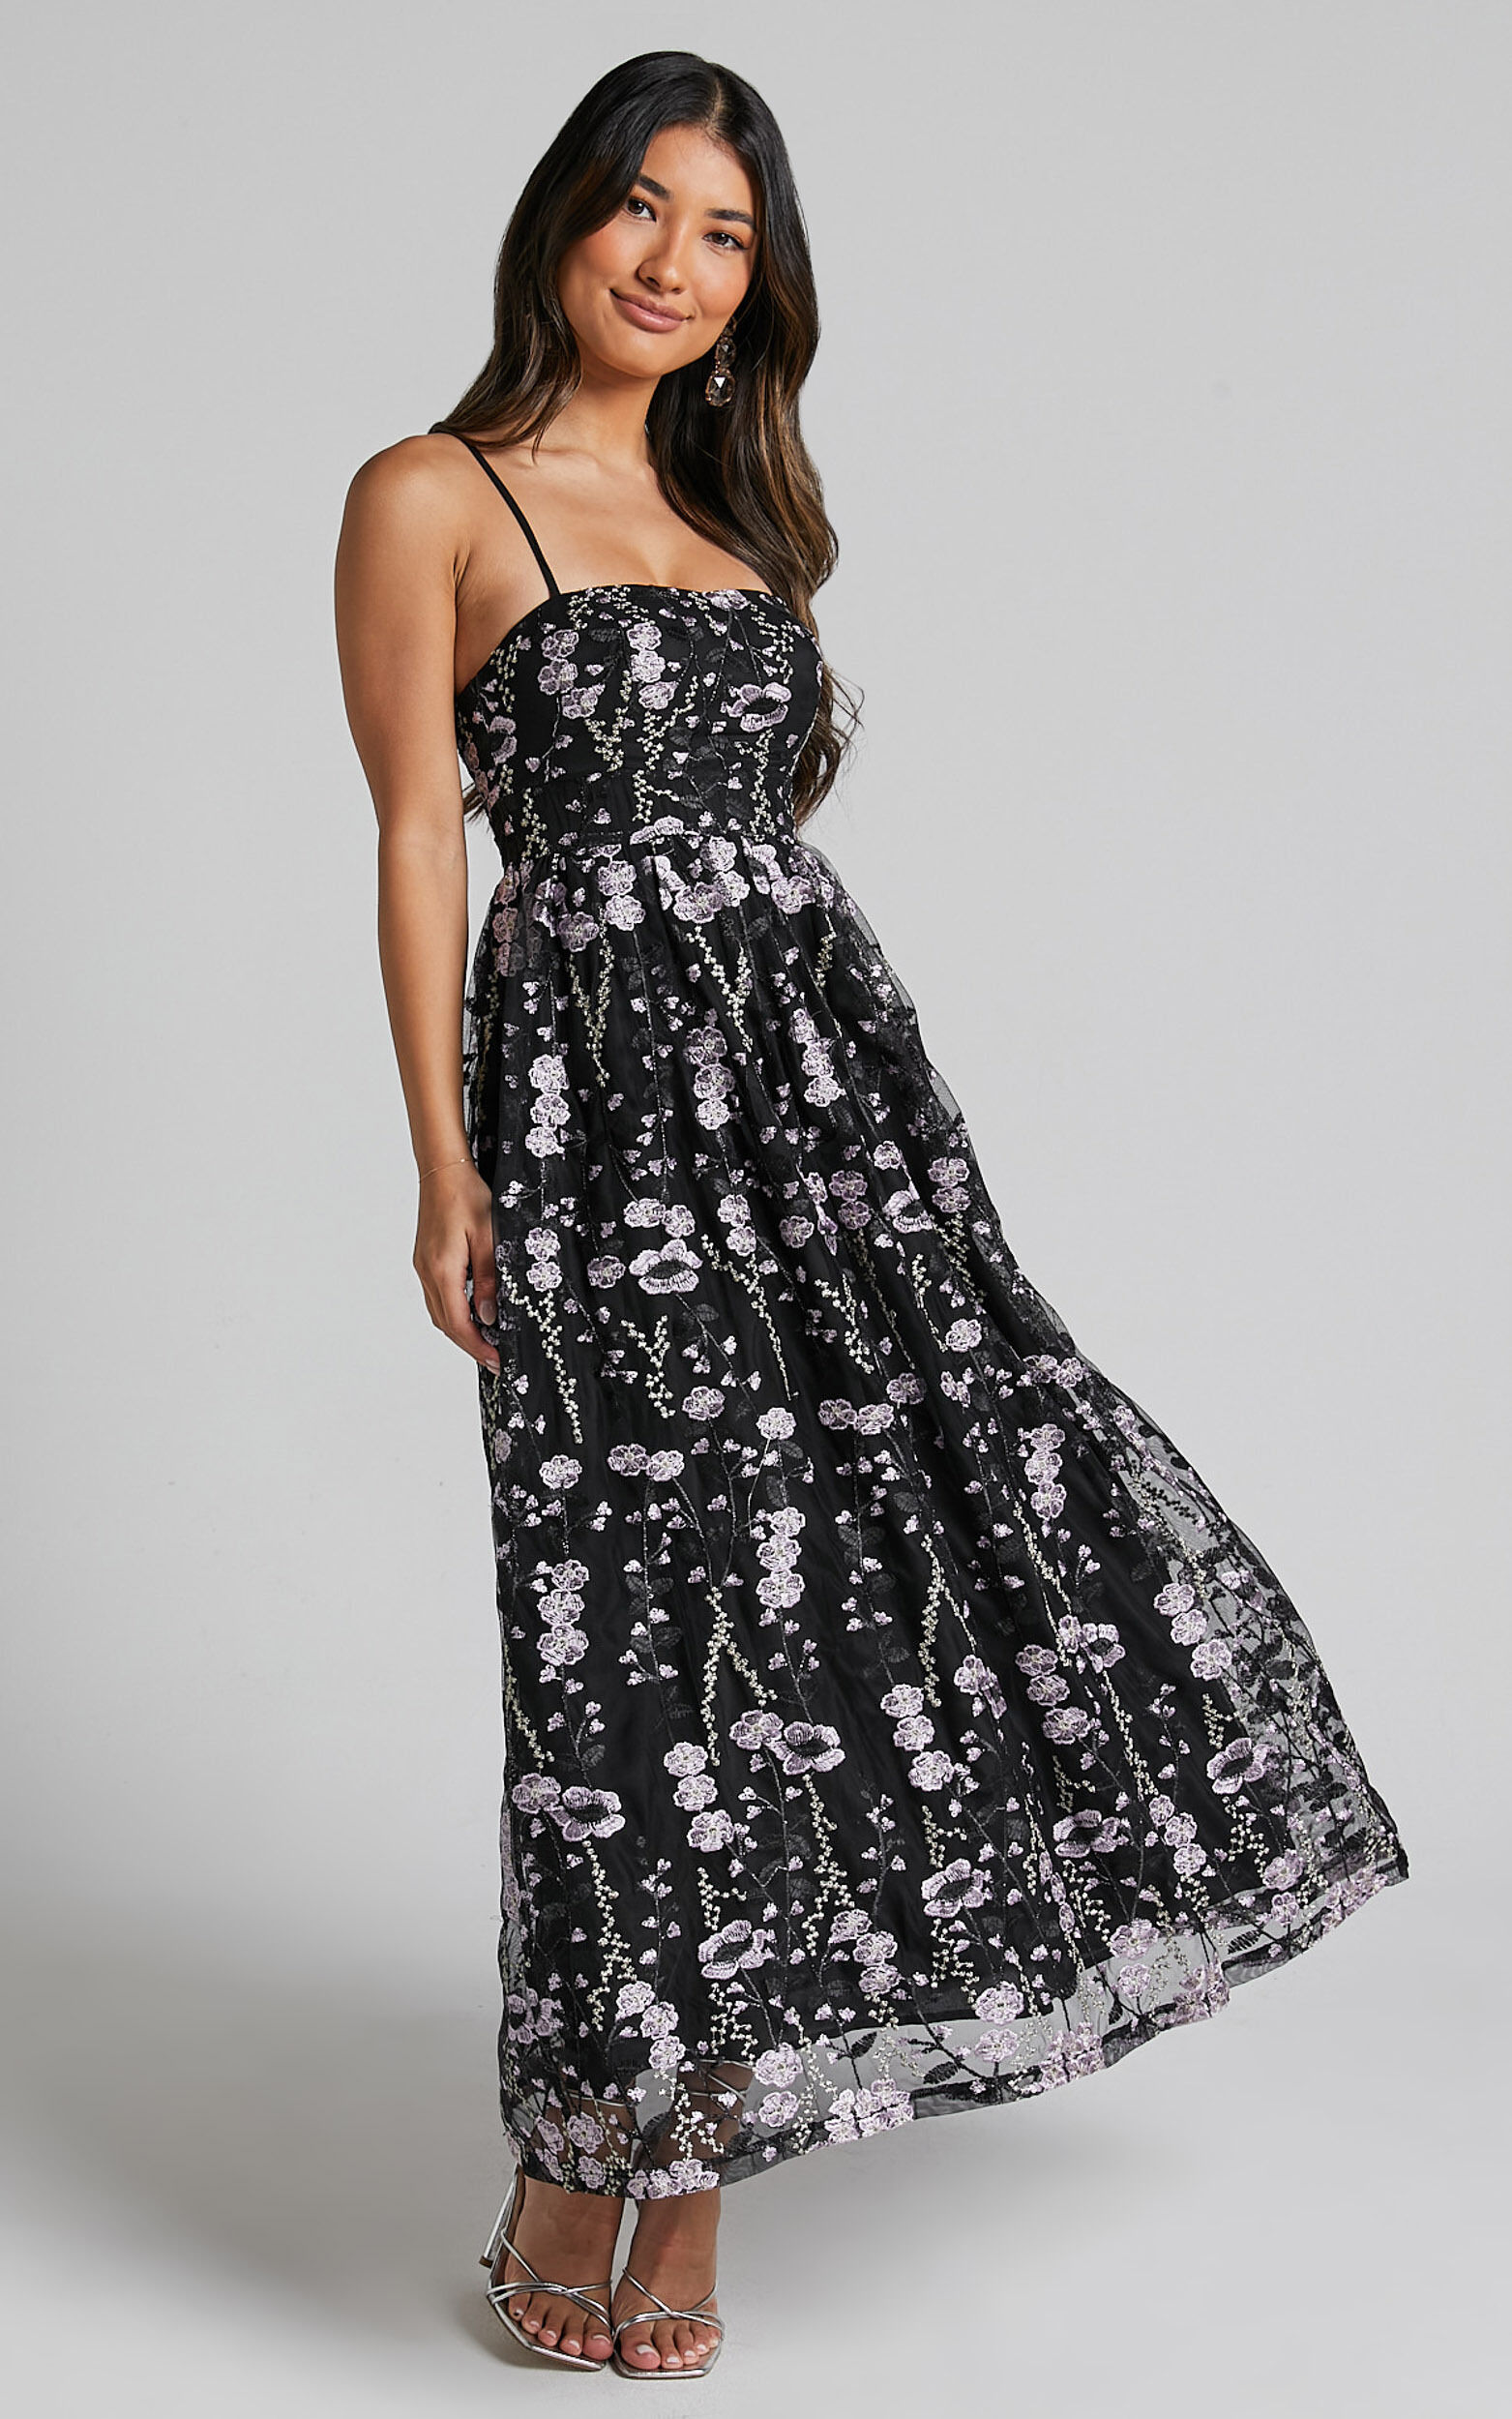 Adeje Maxi Dress -Aline Embroidered Tulle Dress in Black and Purple Floral - 08, BLK1